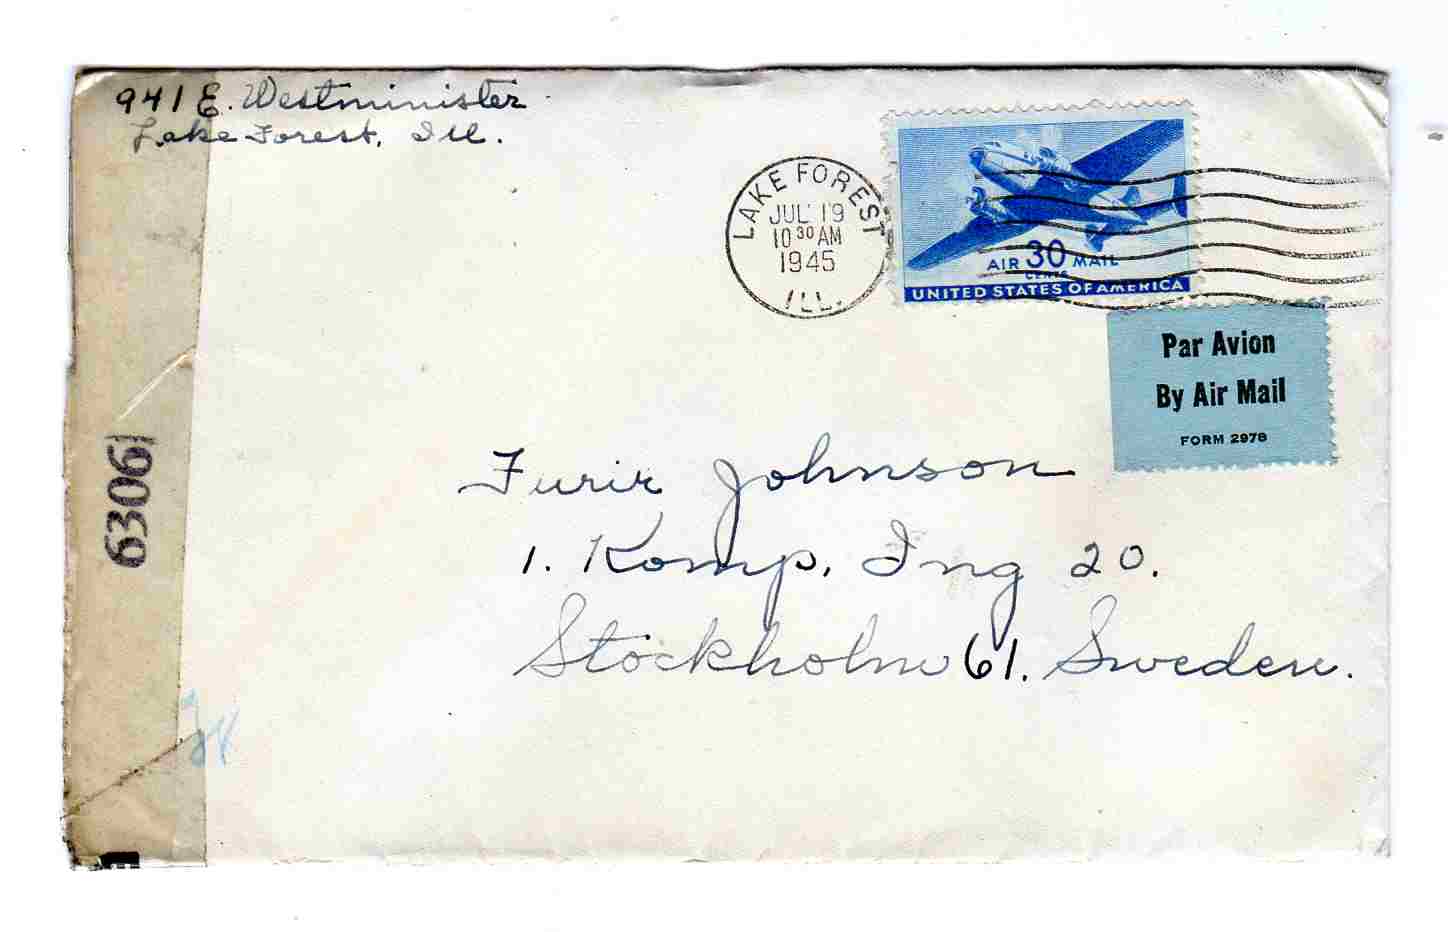 st Lake Forest 1945 Air mail 6306